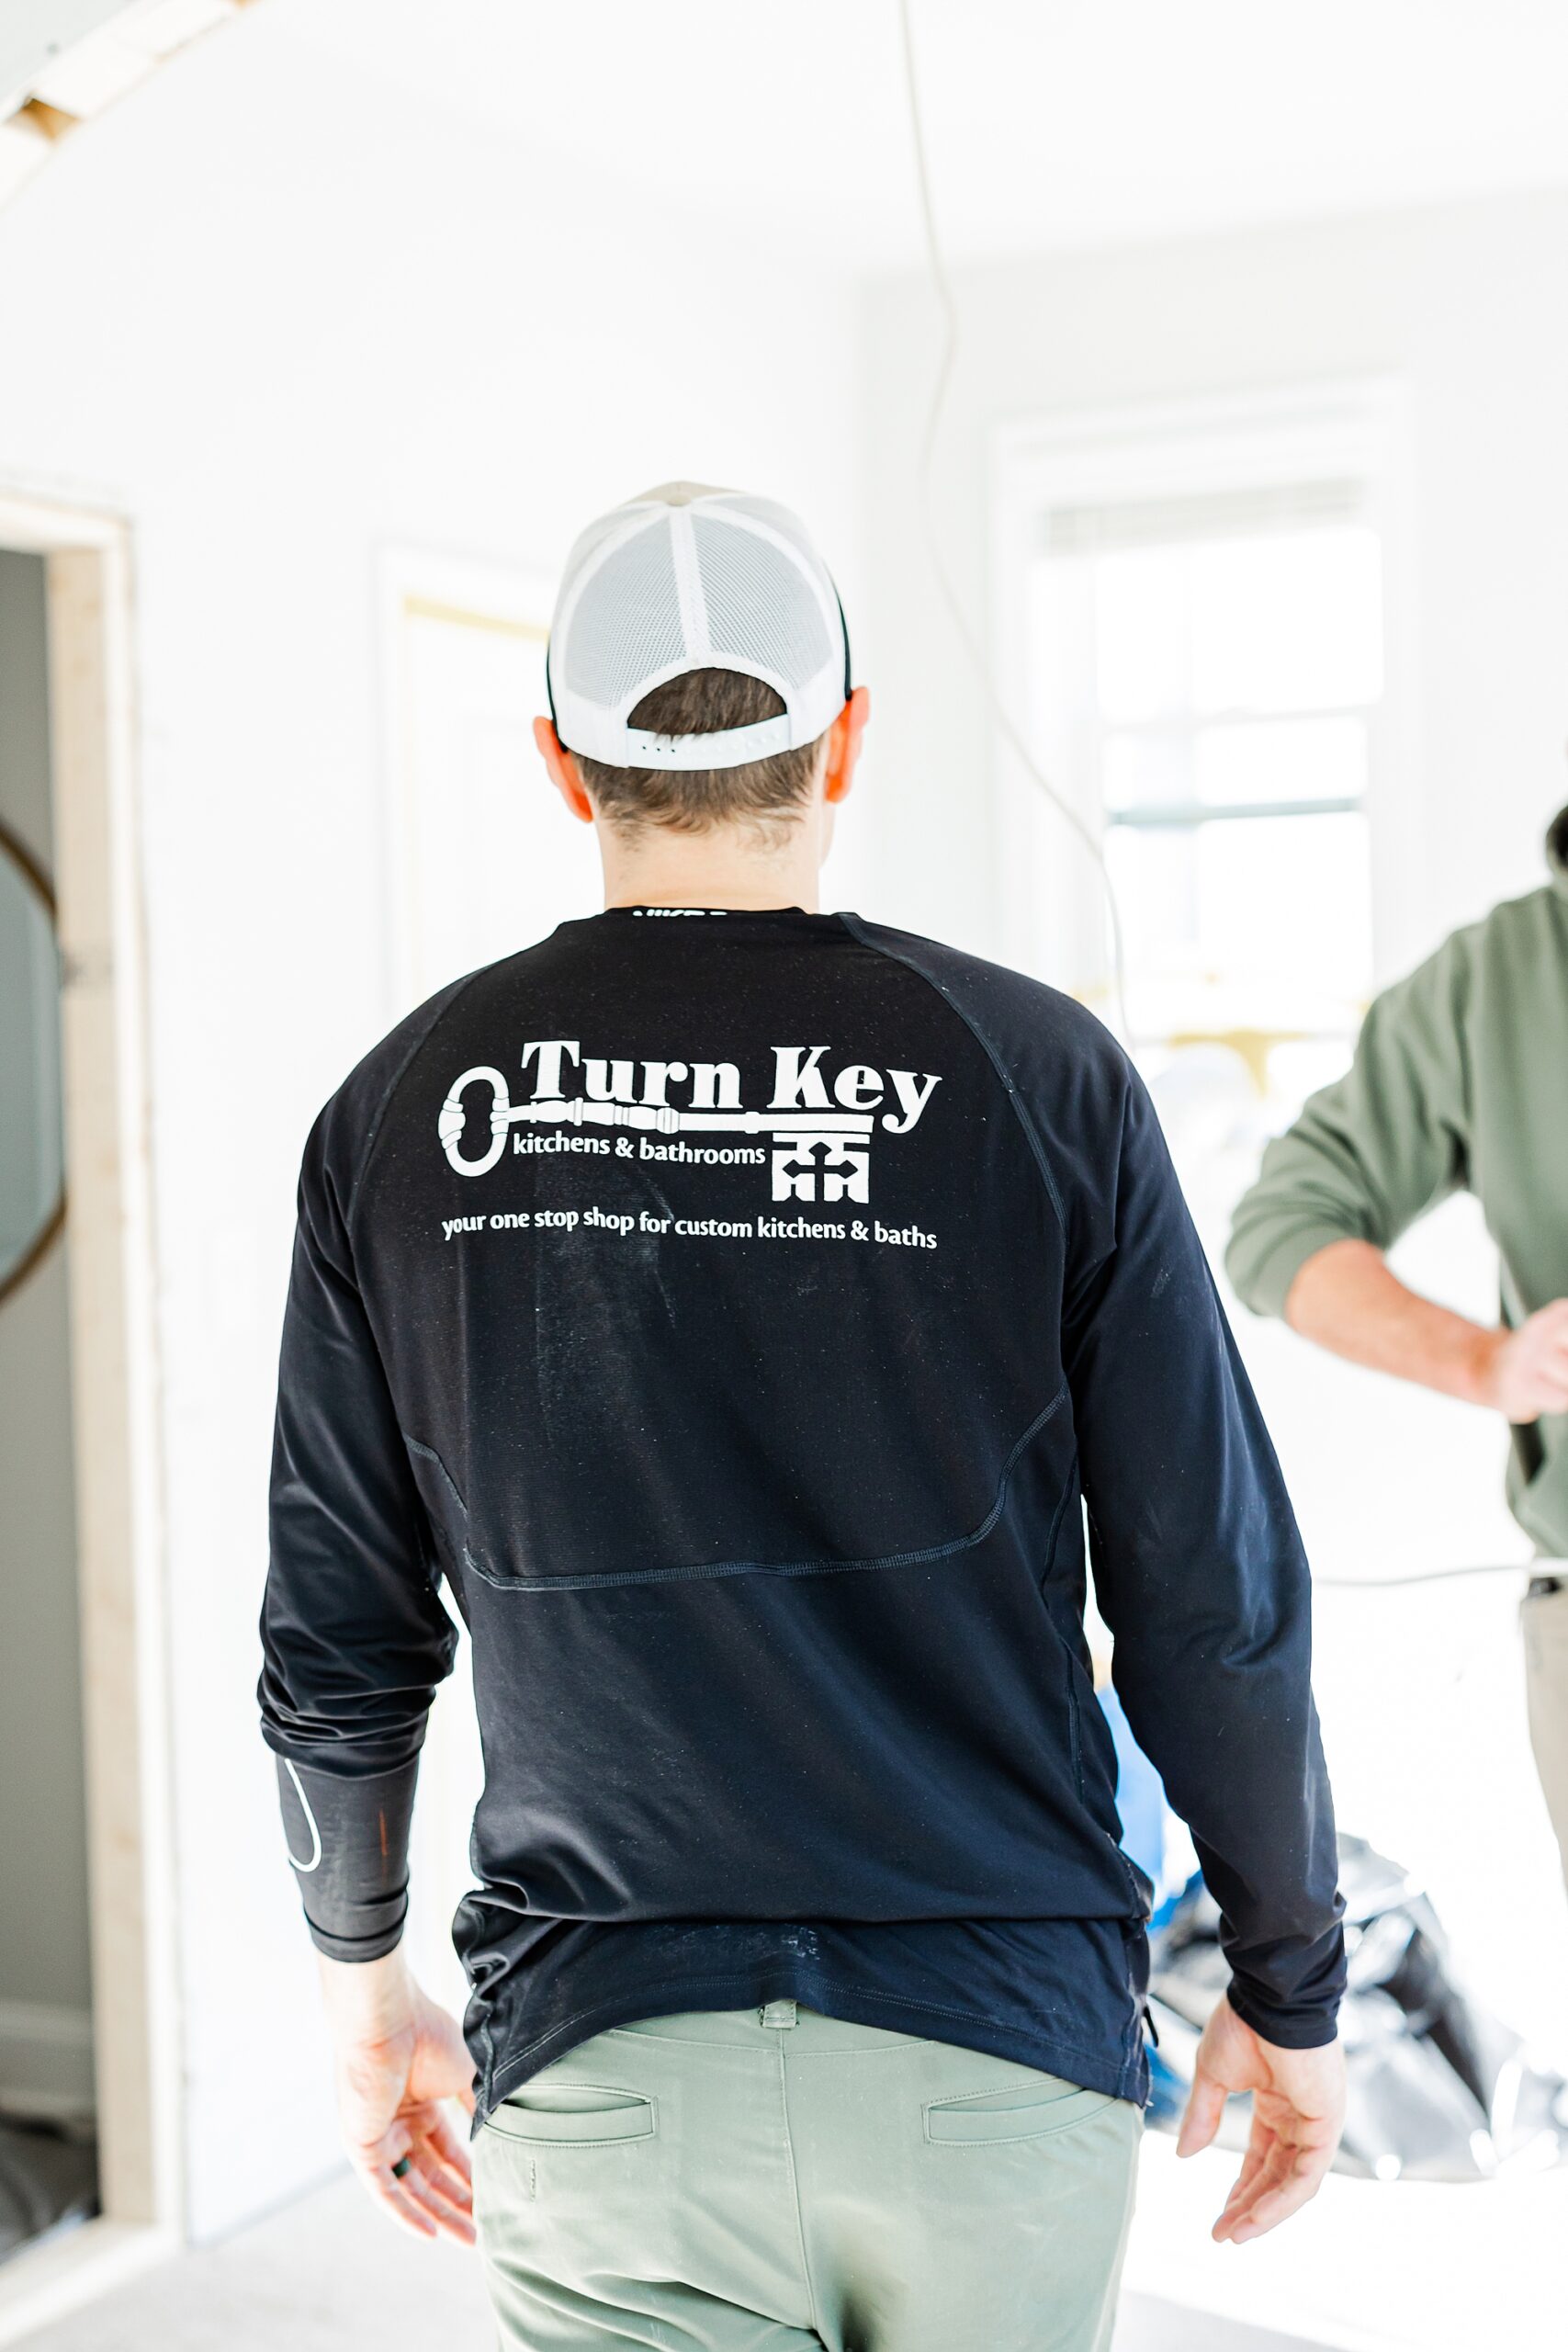 contractor in black Turn Key Solutions shirt talks with worker